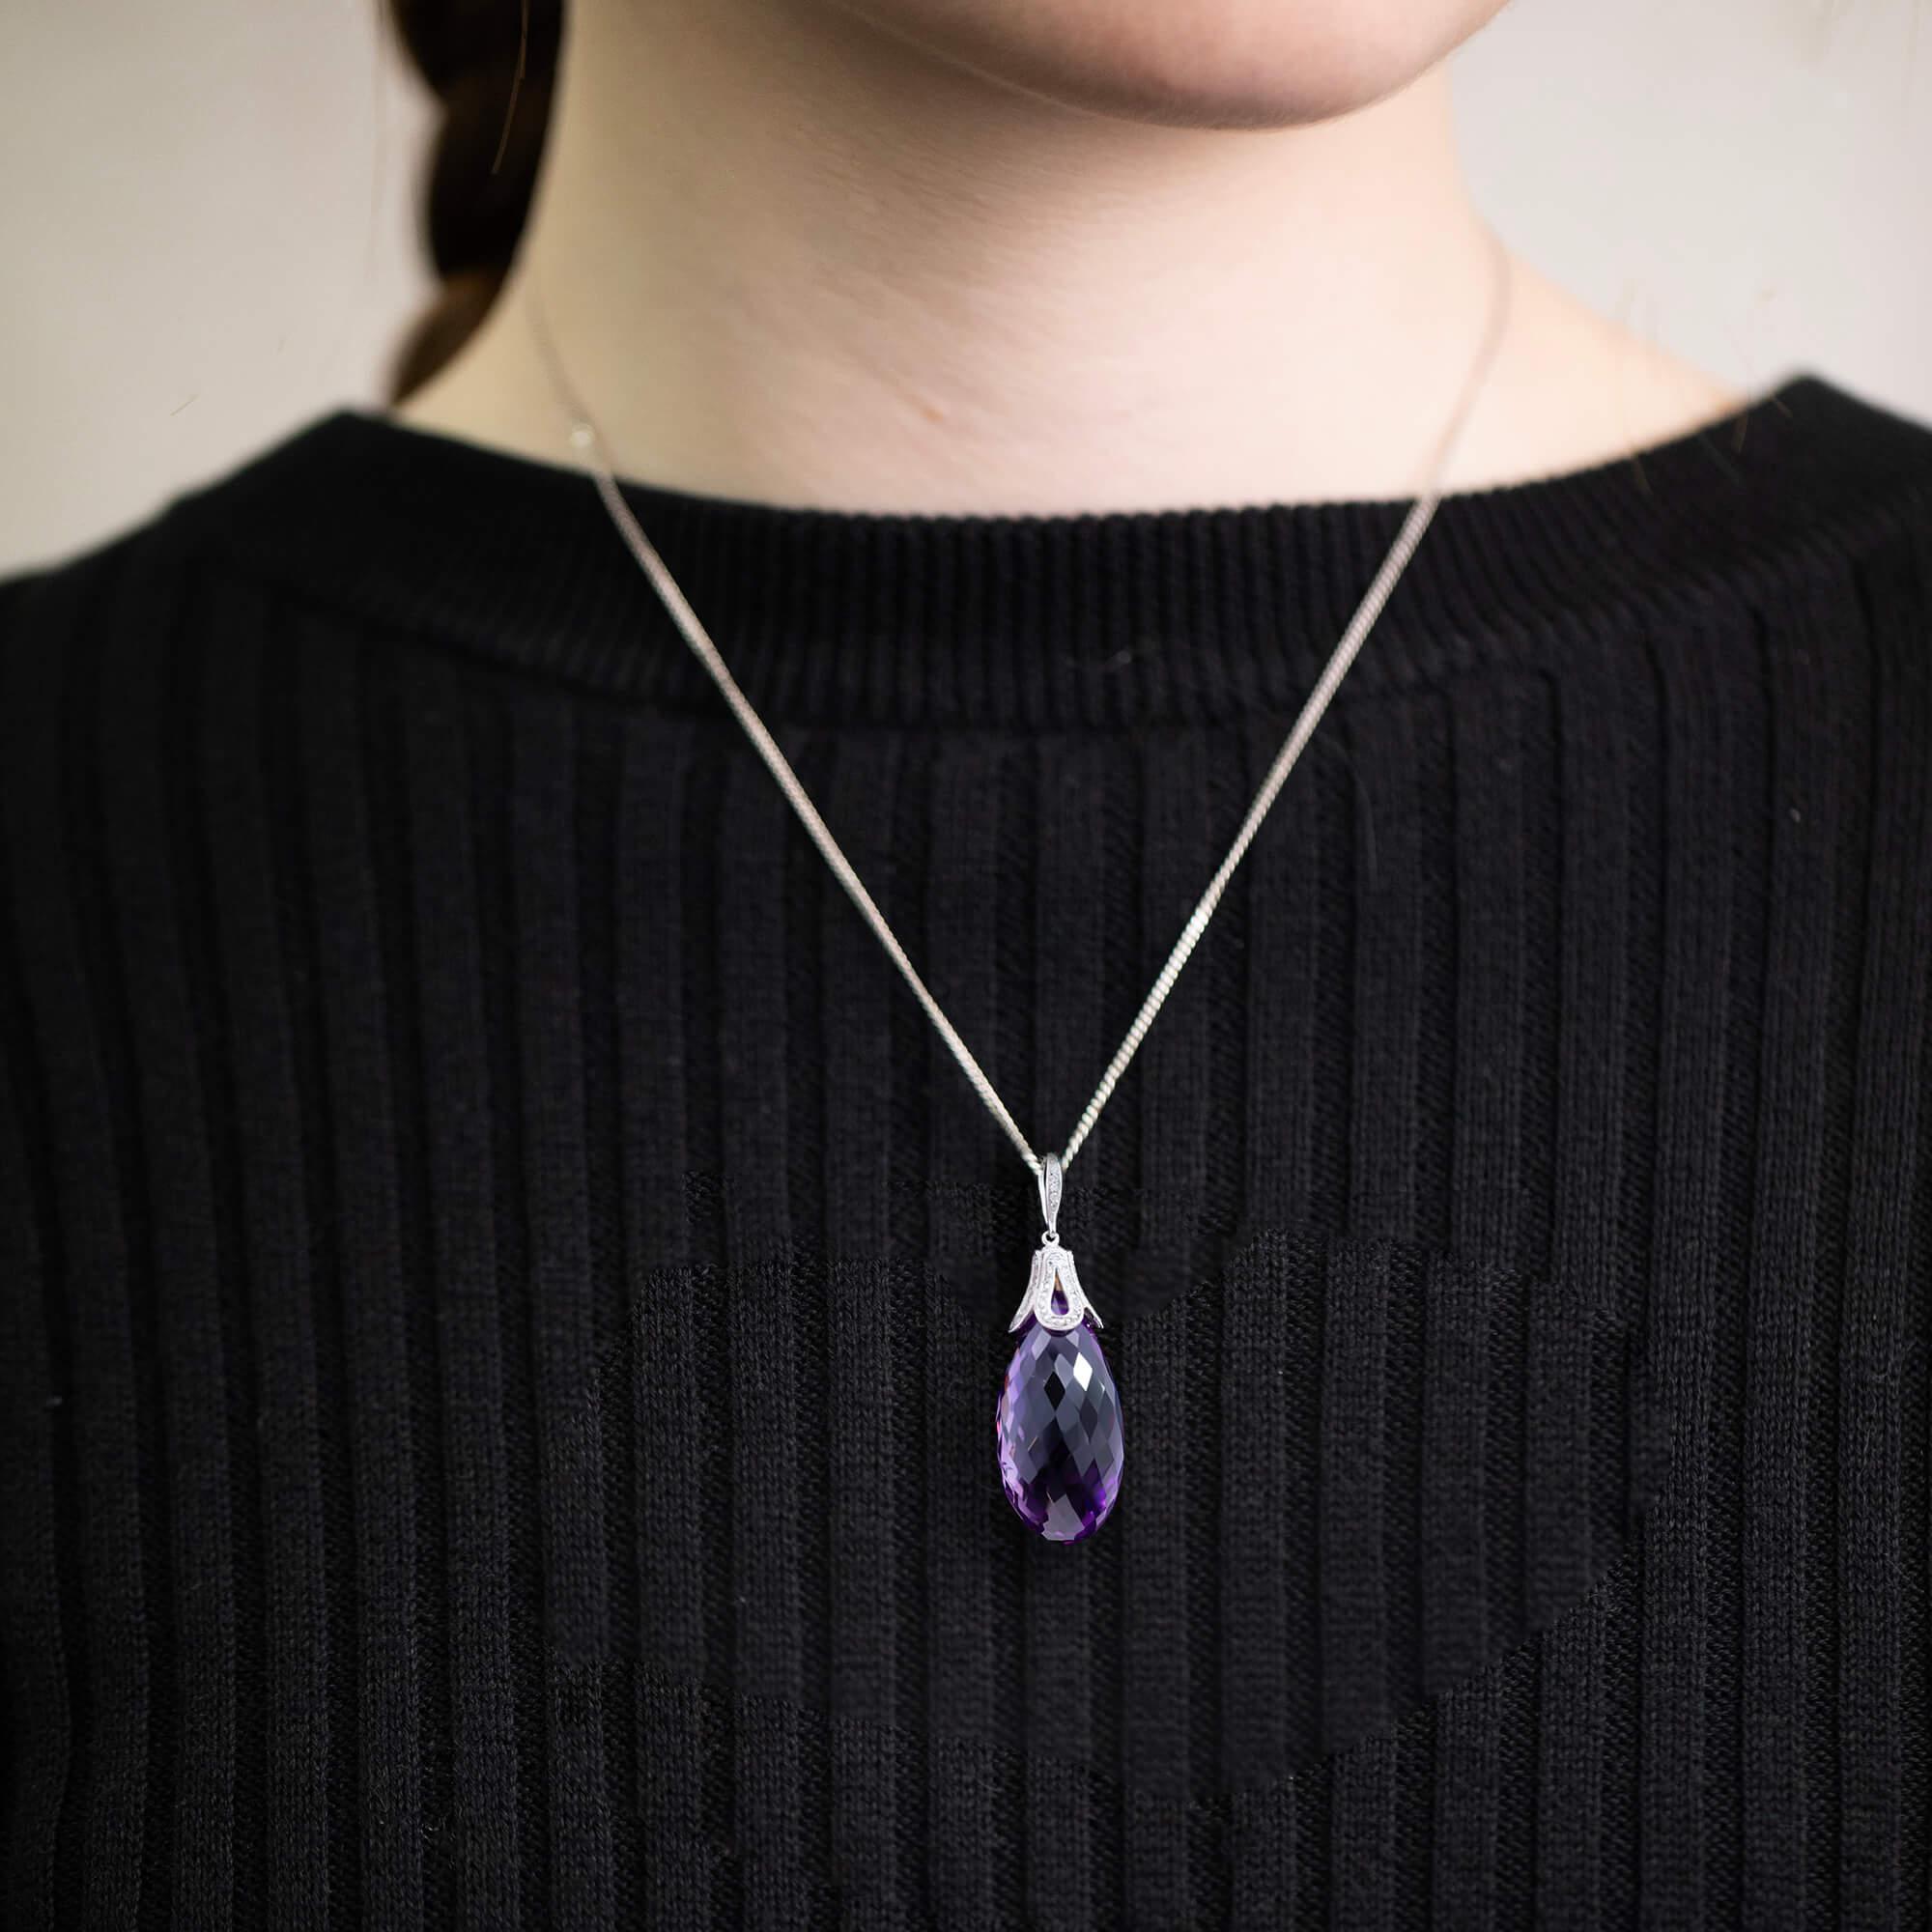 Modern pendant featuring a briolette cut amethyst with a diamond pave set cap and bale.

Gemstone: One Amethyst, briolette cut, good purple material, pique clarity, estimated weight 85.0ct
Diamonds: Eighty six round brilliant diamonds total